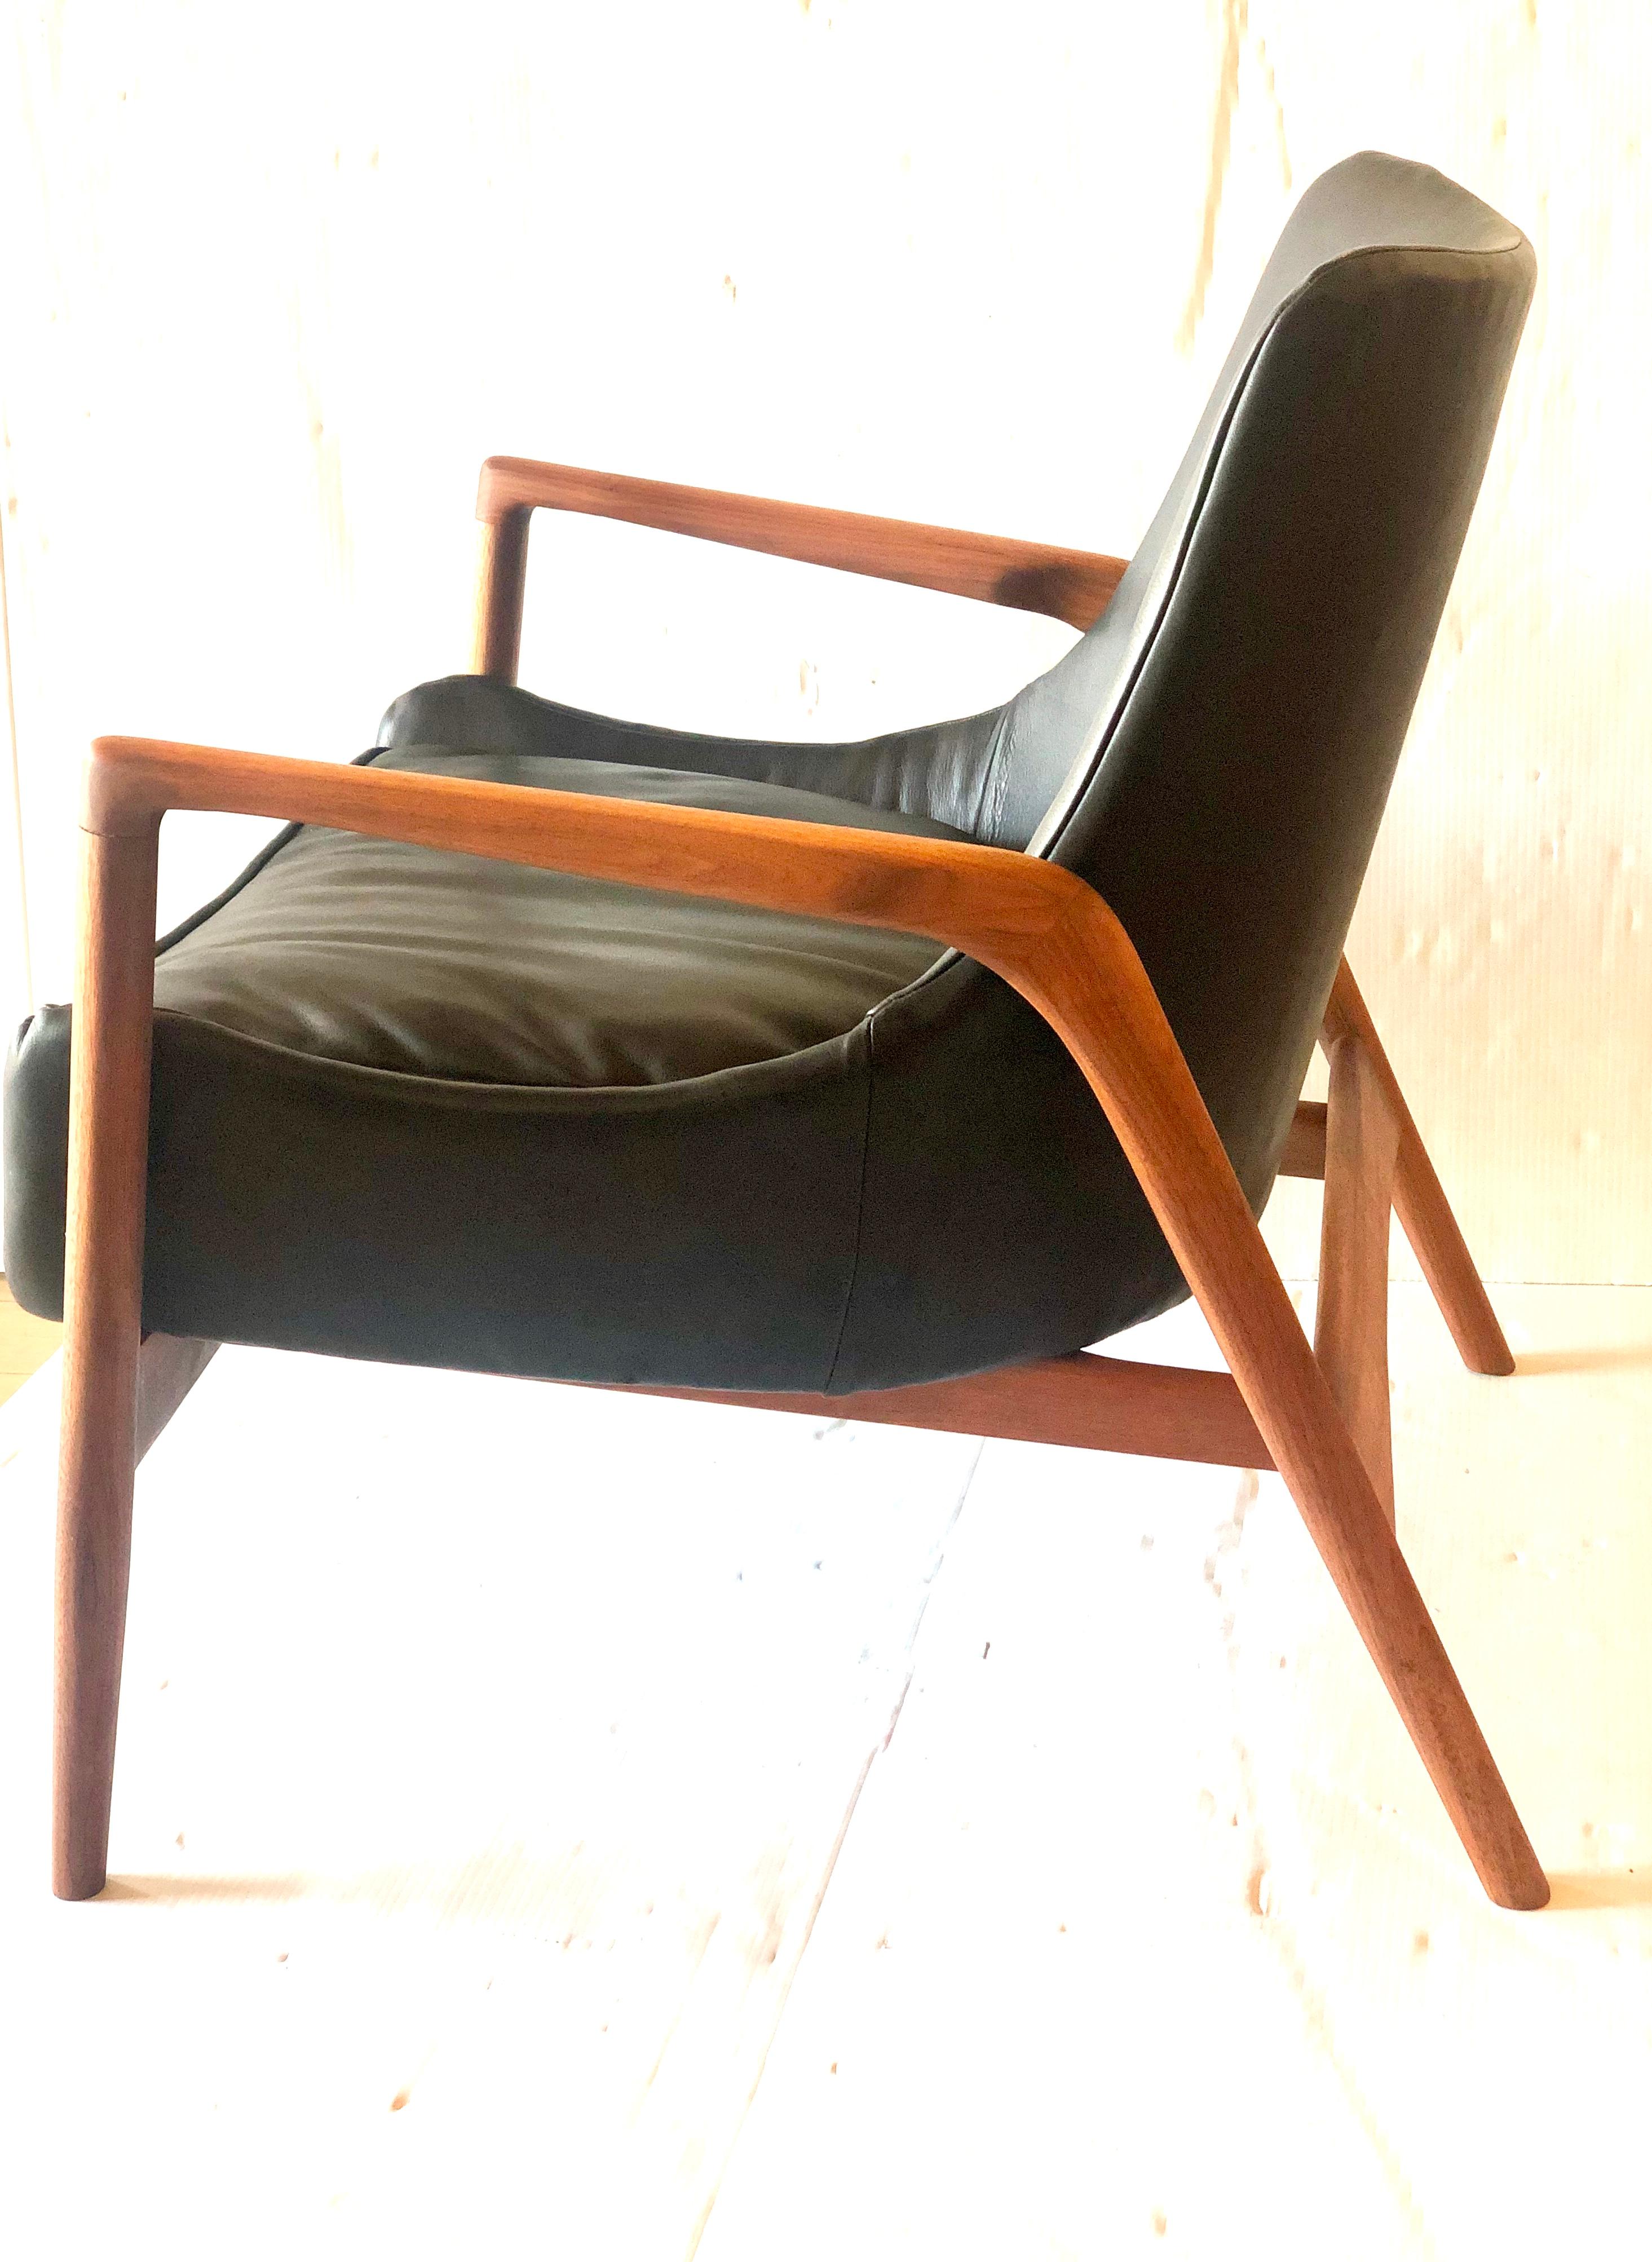 Nice lounge armchair designed by Kofod Larsen, circa 1950s new leather upholstery and freshly refinished walnut frame, solid and sturdy .